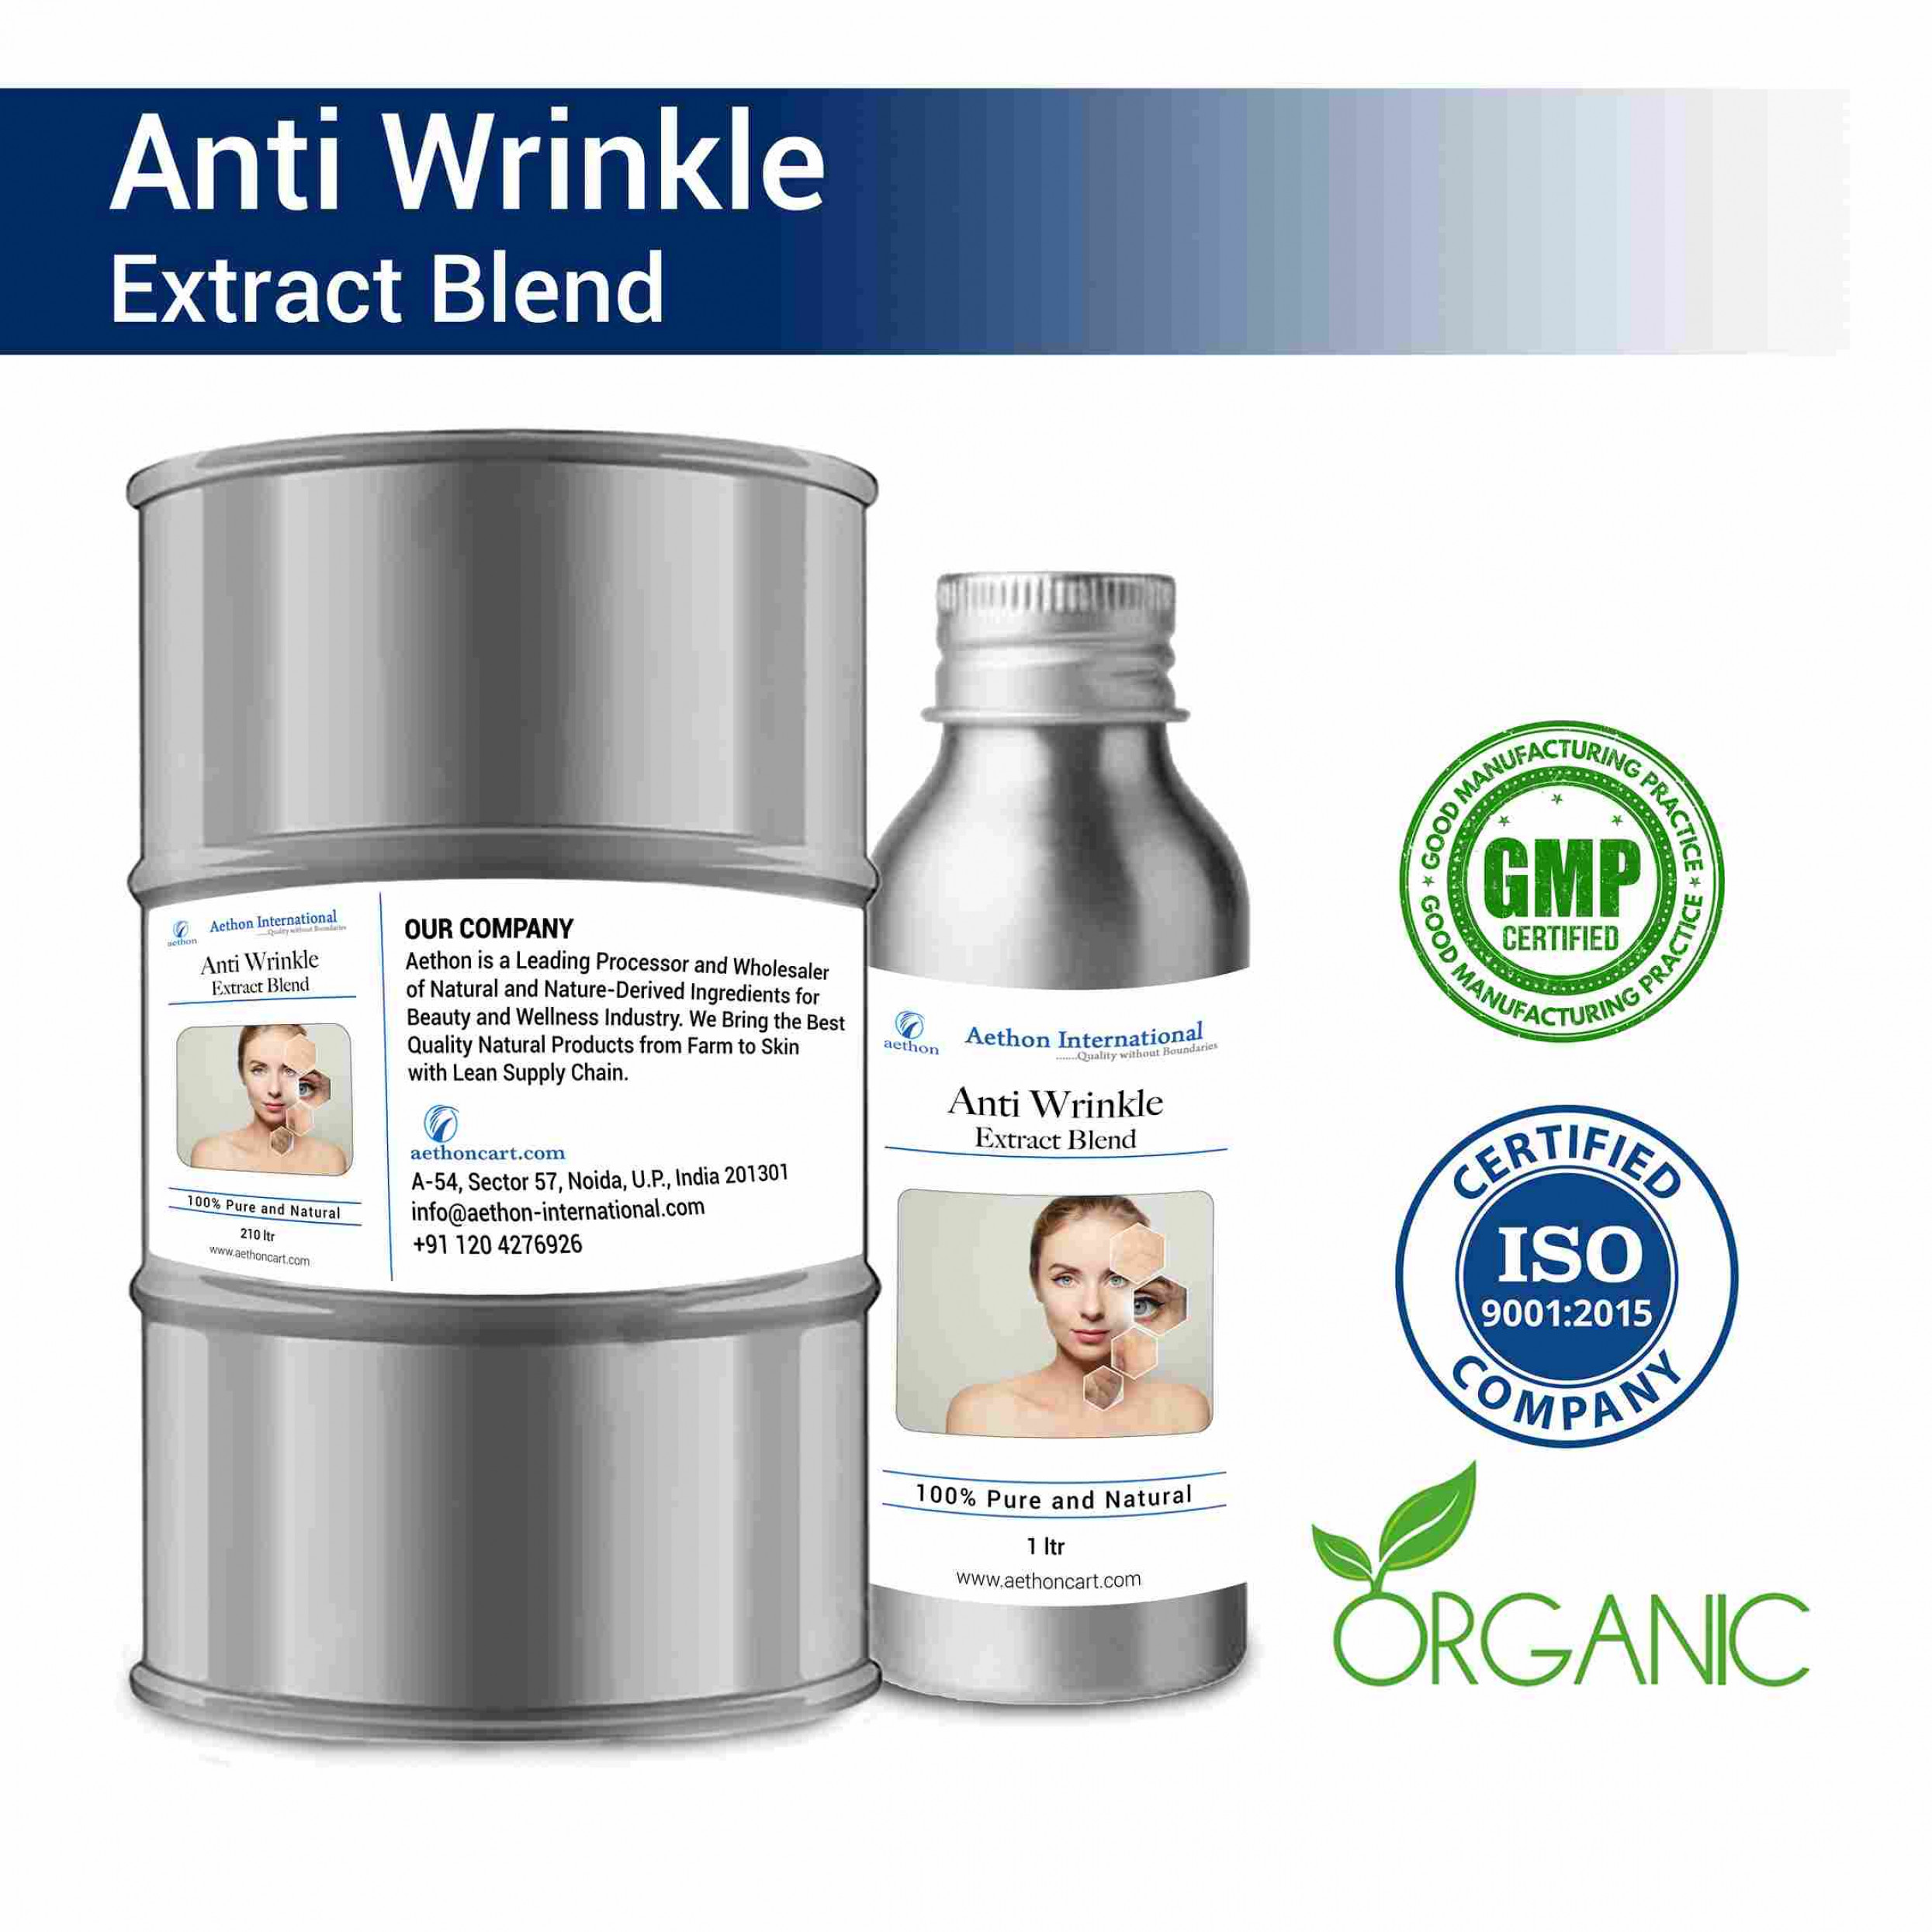 Anti Wrinkle Extract Blend (Oil)